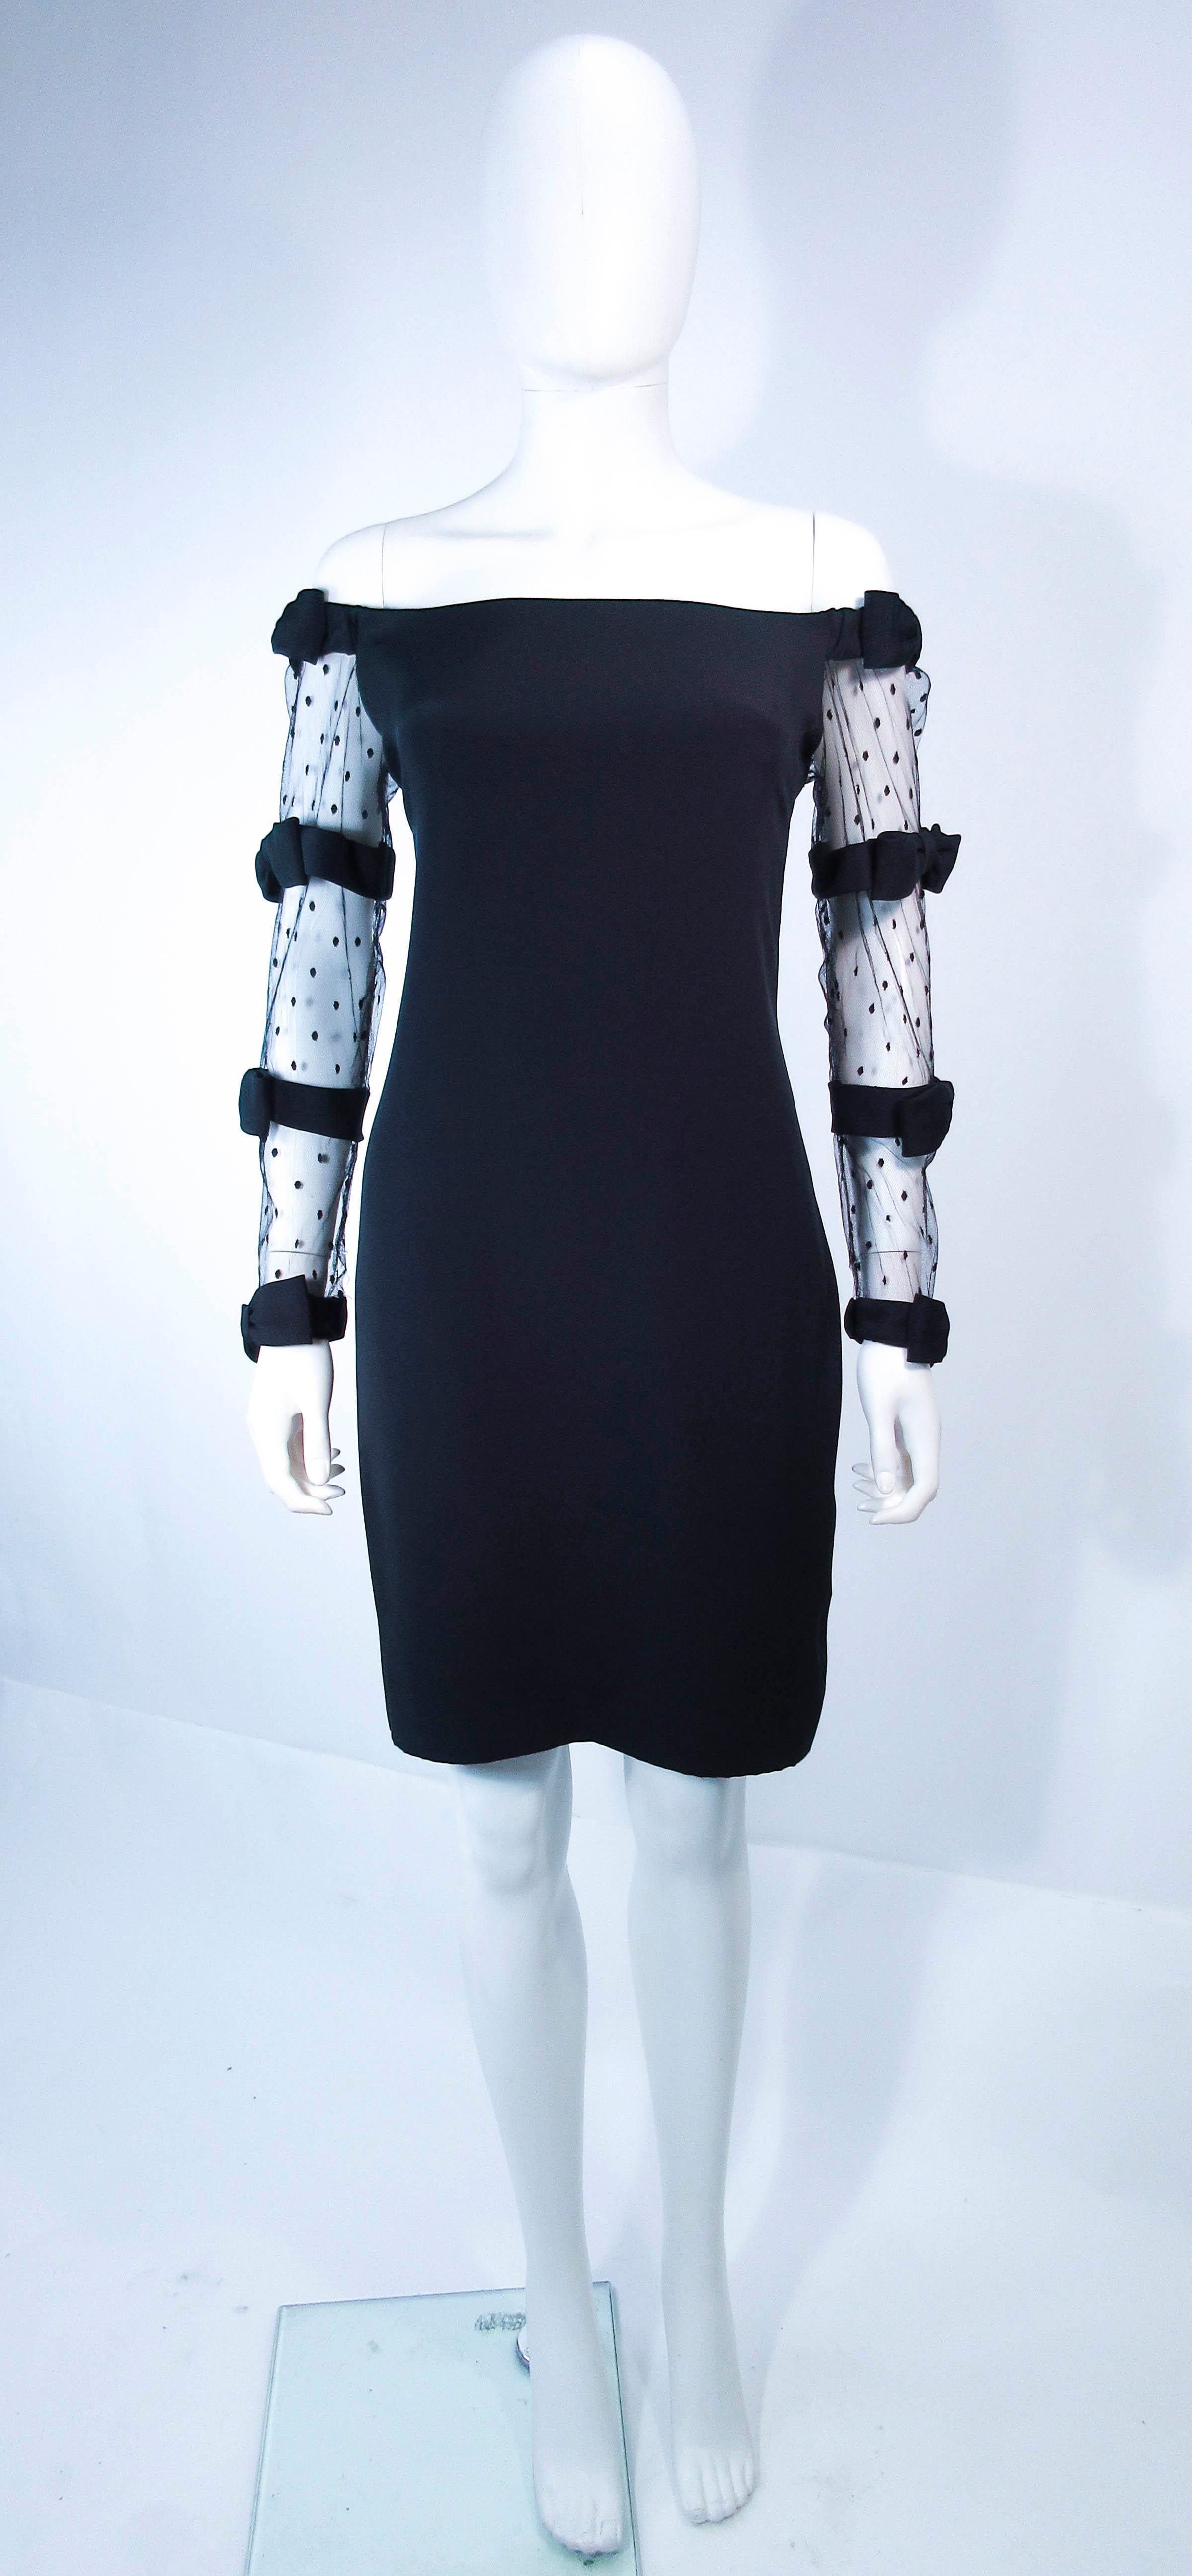 This Fred Heyman Beverly Hills cocktail dress is composed of a black silk and features mesh polka dot patterned sleeves. Features a center back zipper closure. In excellent vintage condition.

**Please cross-reference measurements for personal